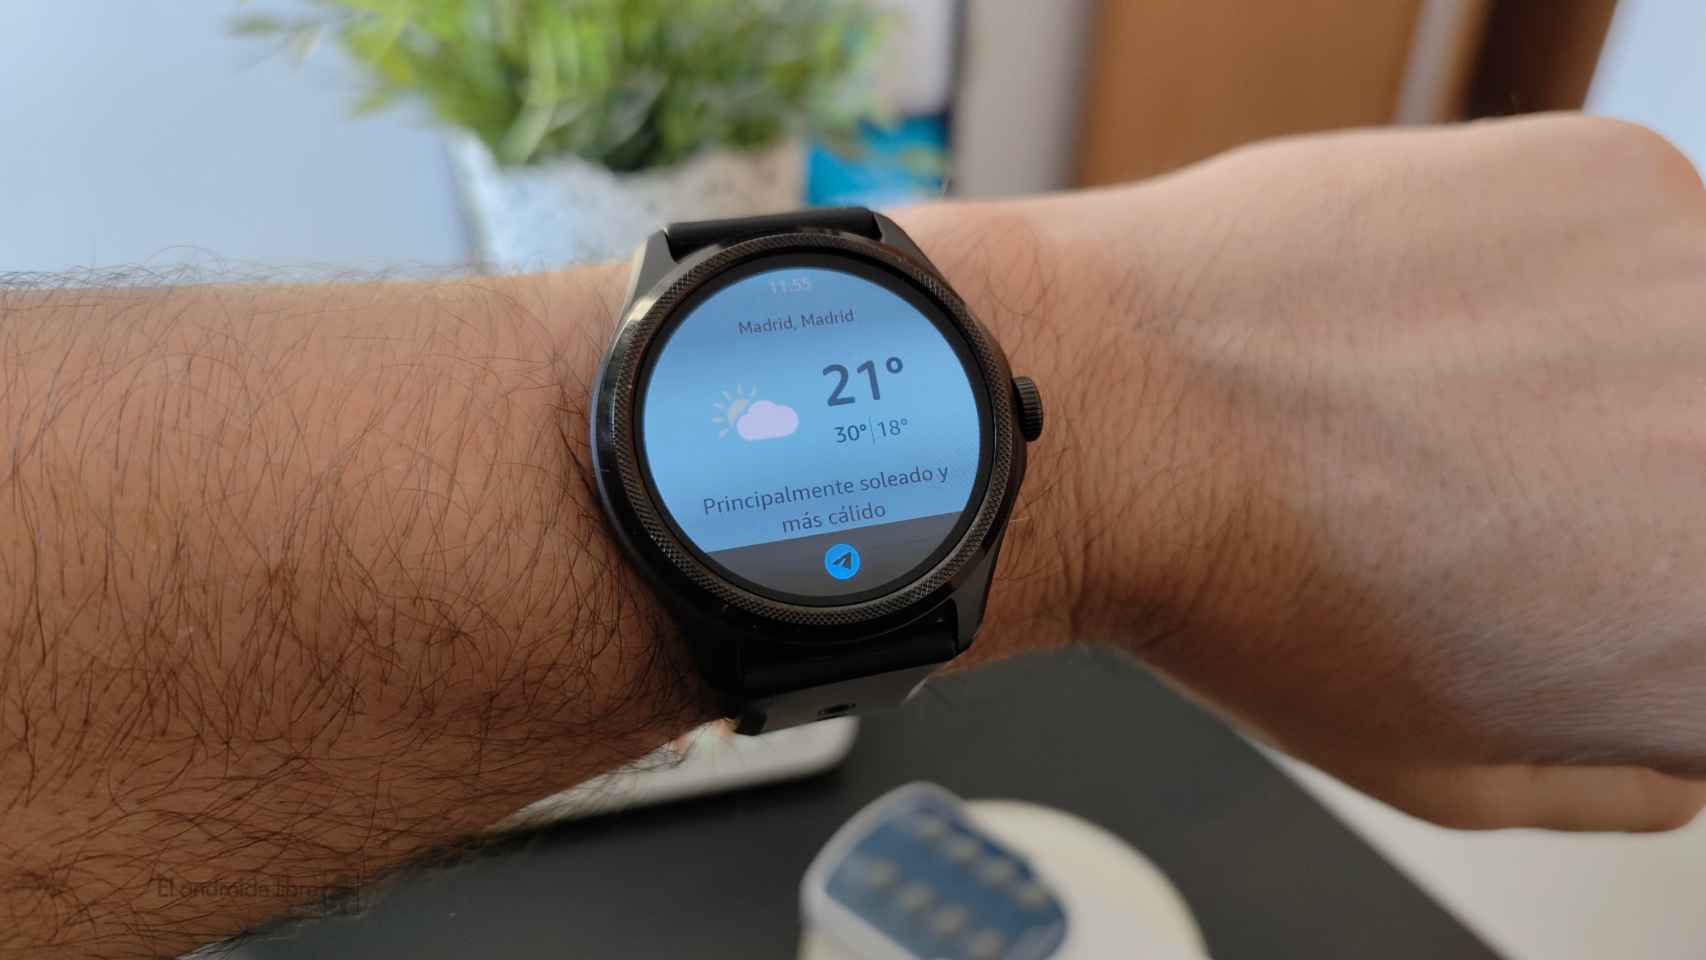 You can install Alexa on any Wear OS watch